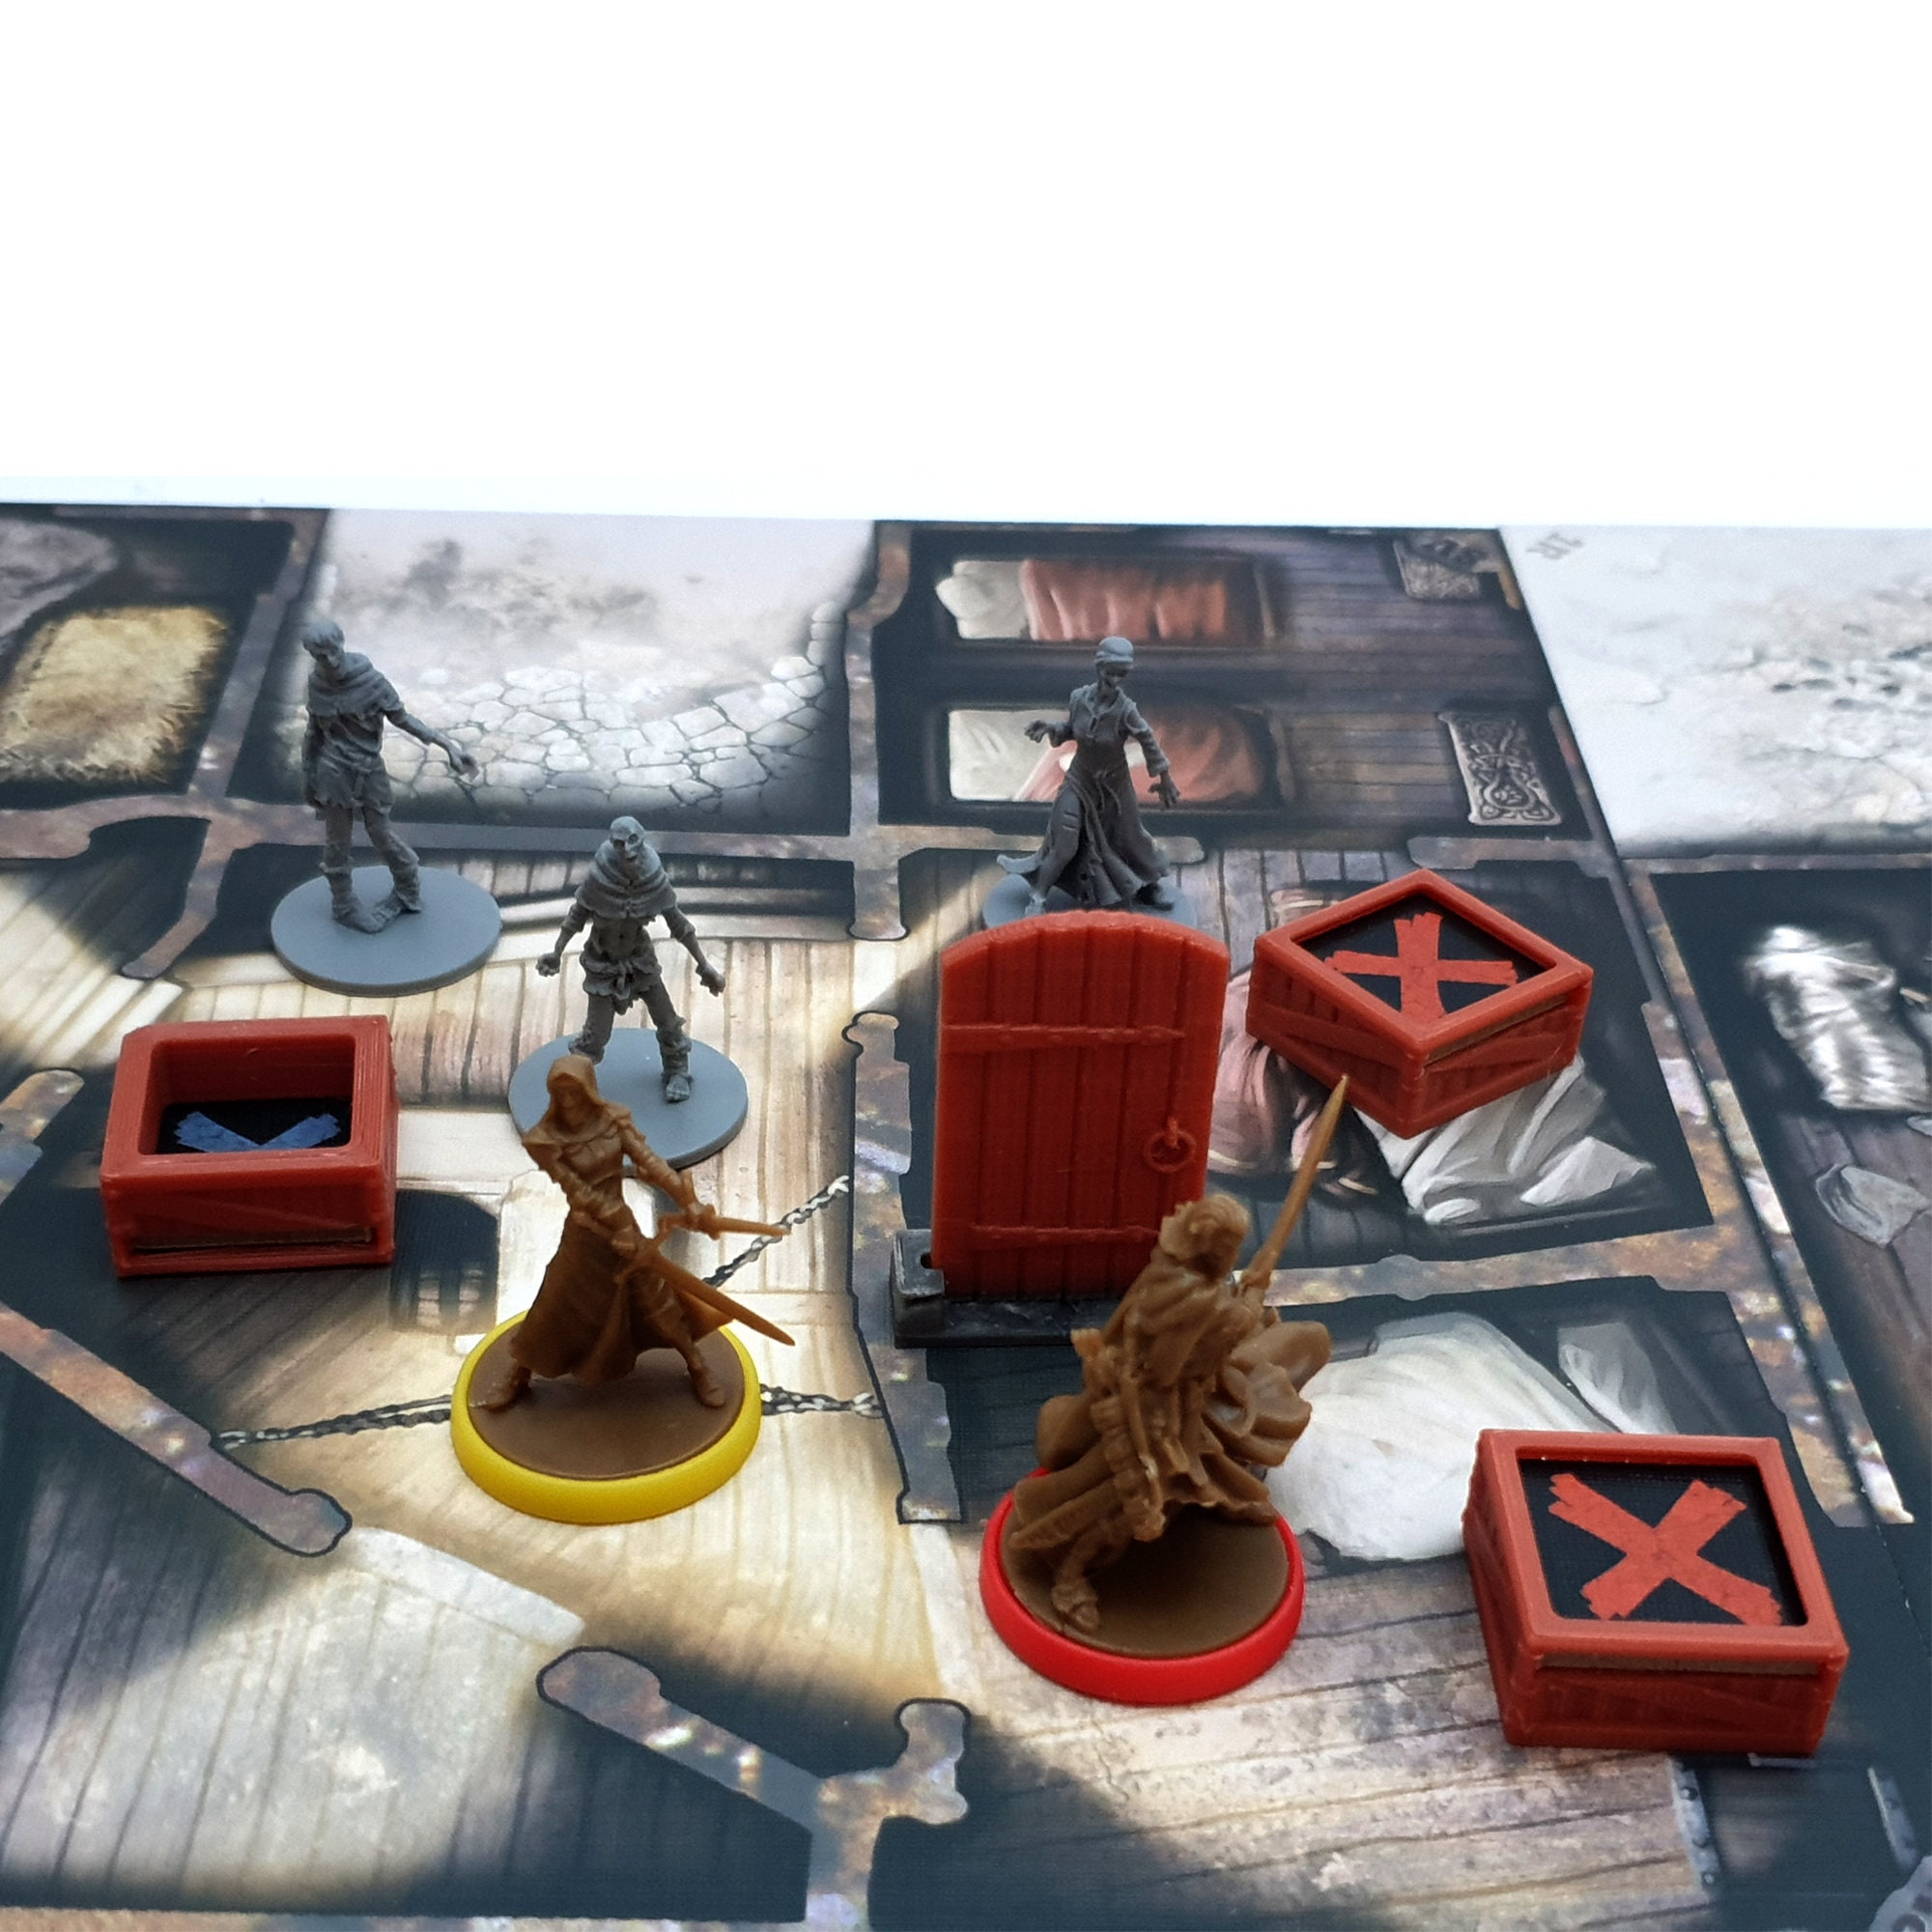 Zombicide Black Plague 8x Wooden Crate Objective Board Game 